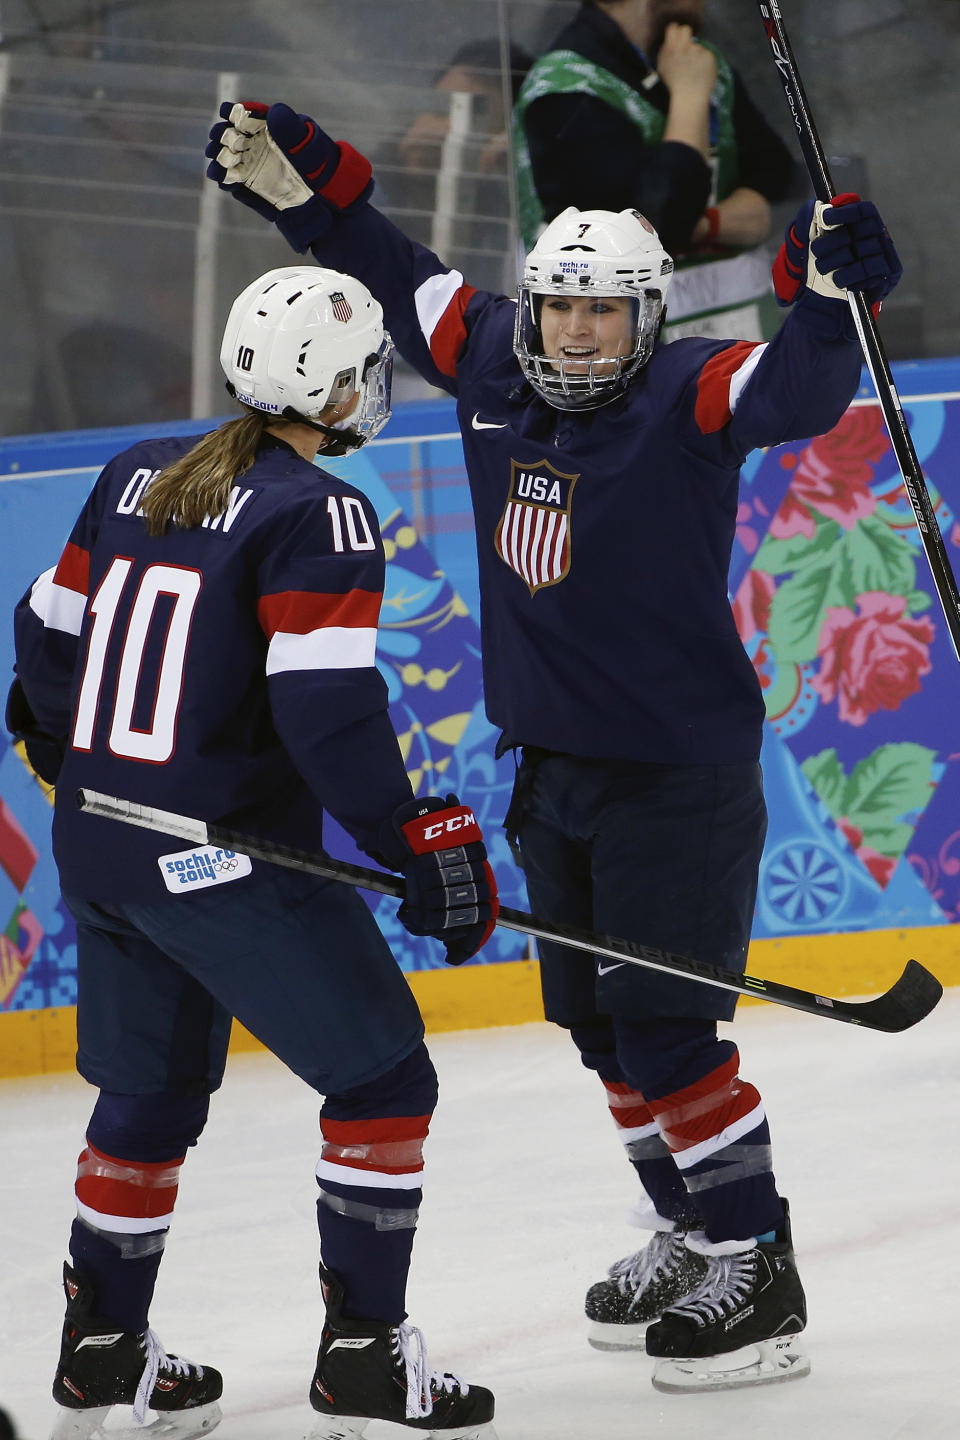 Monique Lamoureux of the Untied States celebrates her goal against Switzerland with teammate Meghan Duggan of the Untied States during the first period of the 2014 Winter Olympics women's ice hockey game at Shayba Arena, Monday, Feb. 10, 2014, in Sochi, Russia. (AP Photo/Petr David Josek)